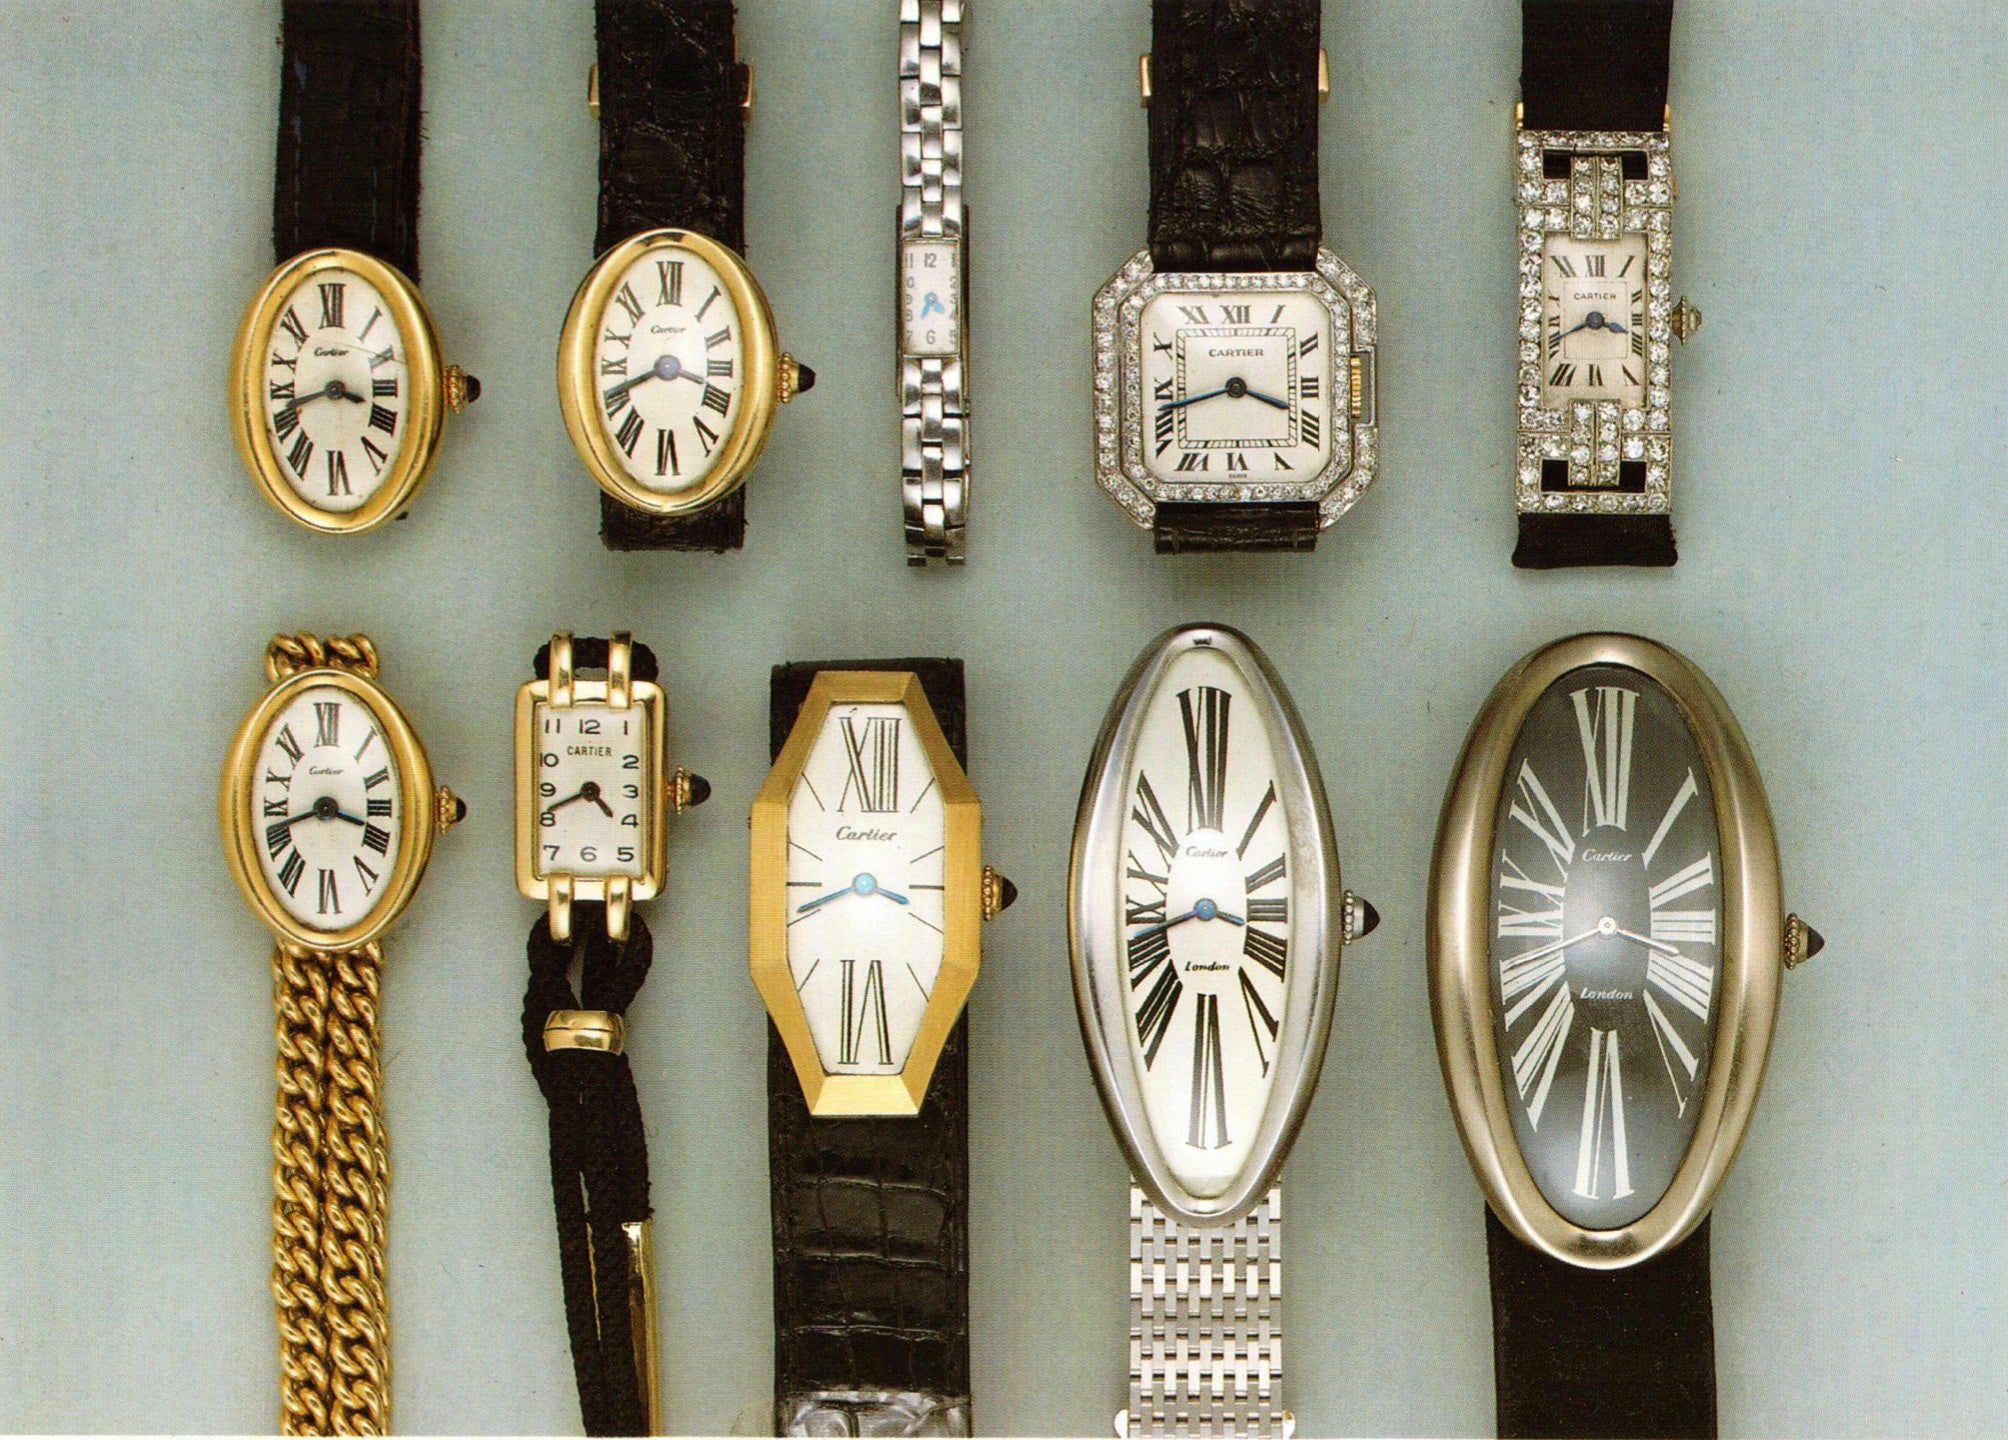 Auction catalogue of Cartier watches in The Early Days of Vintage Wristwatch Collecting for A Collected Man London